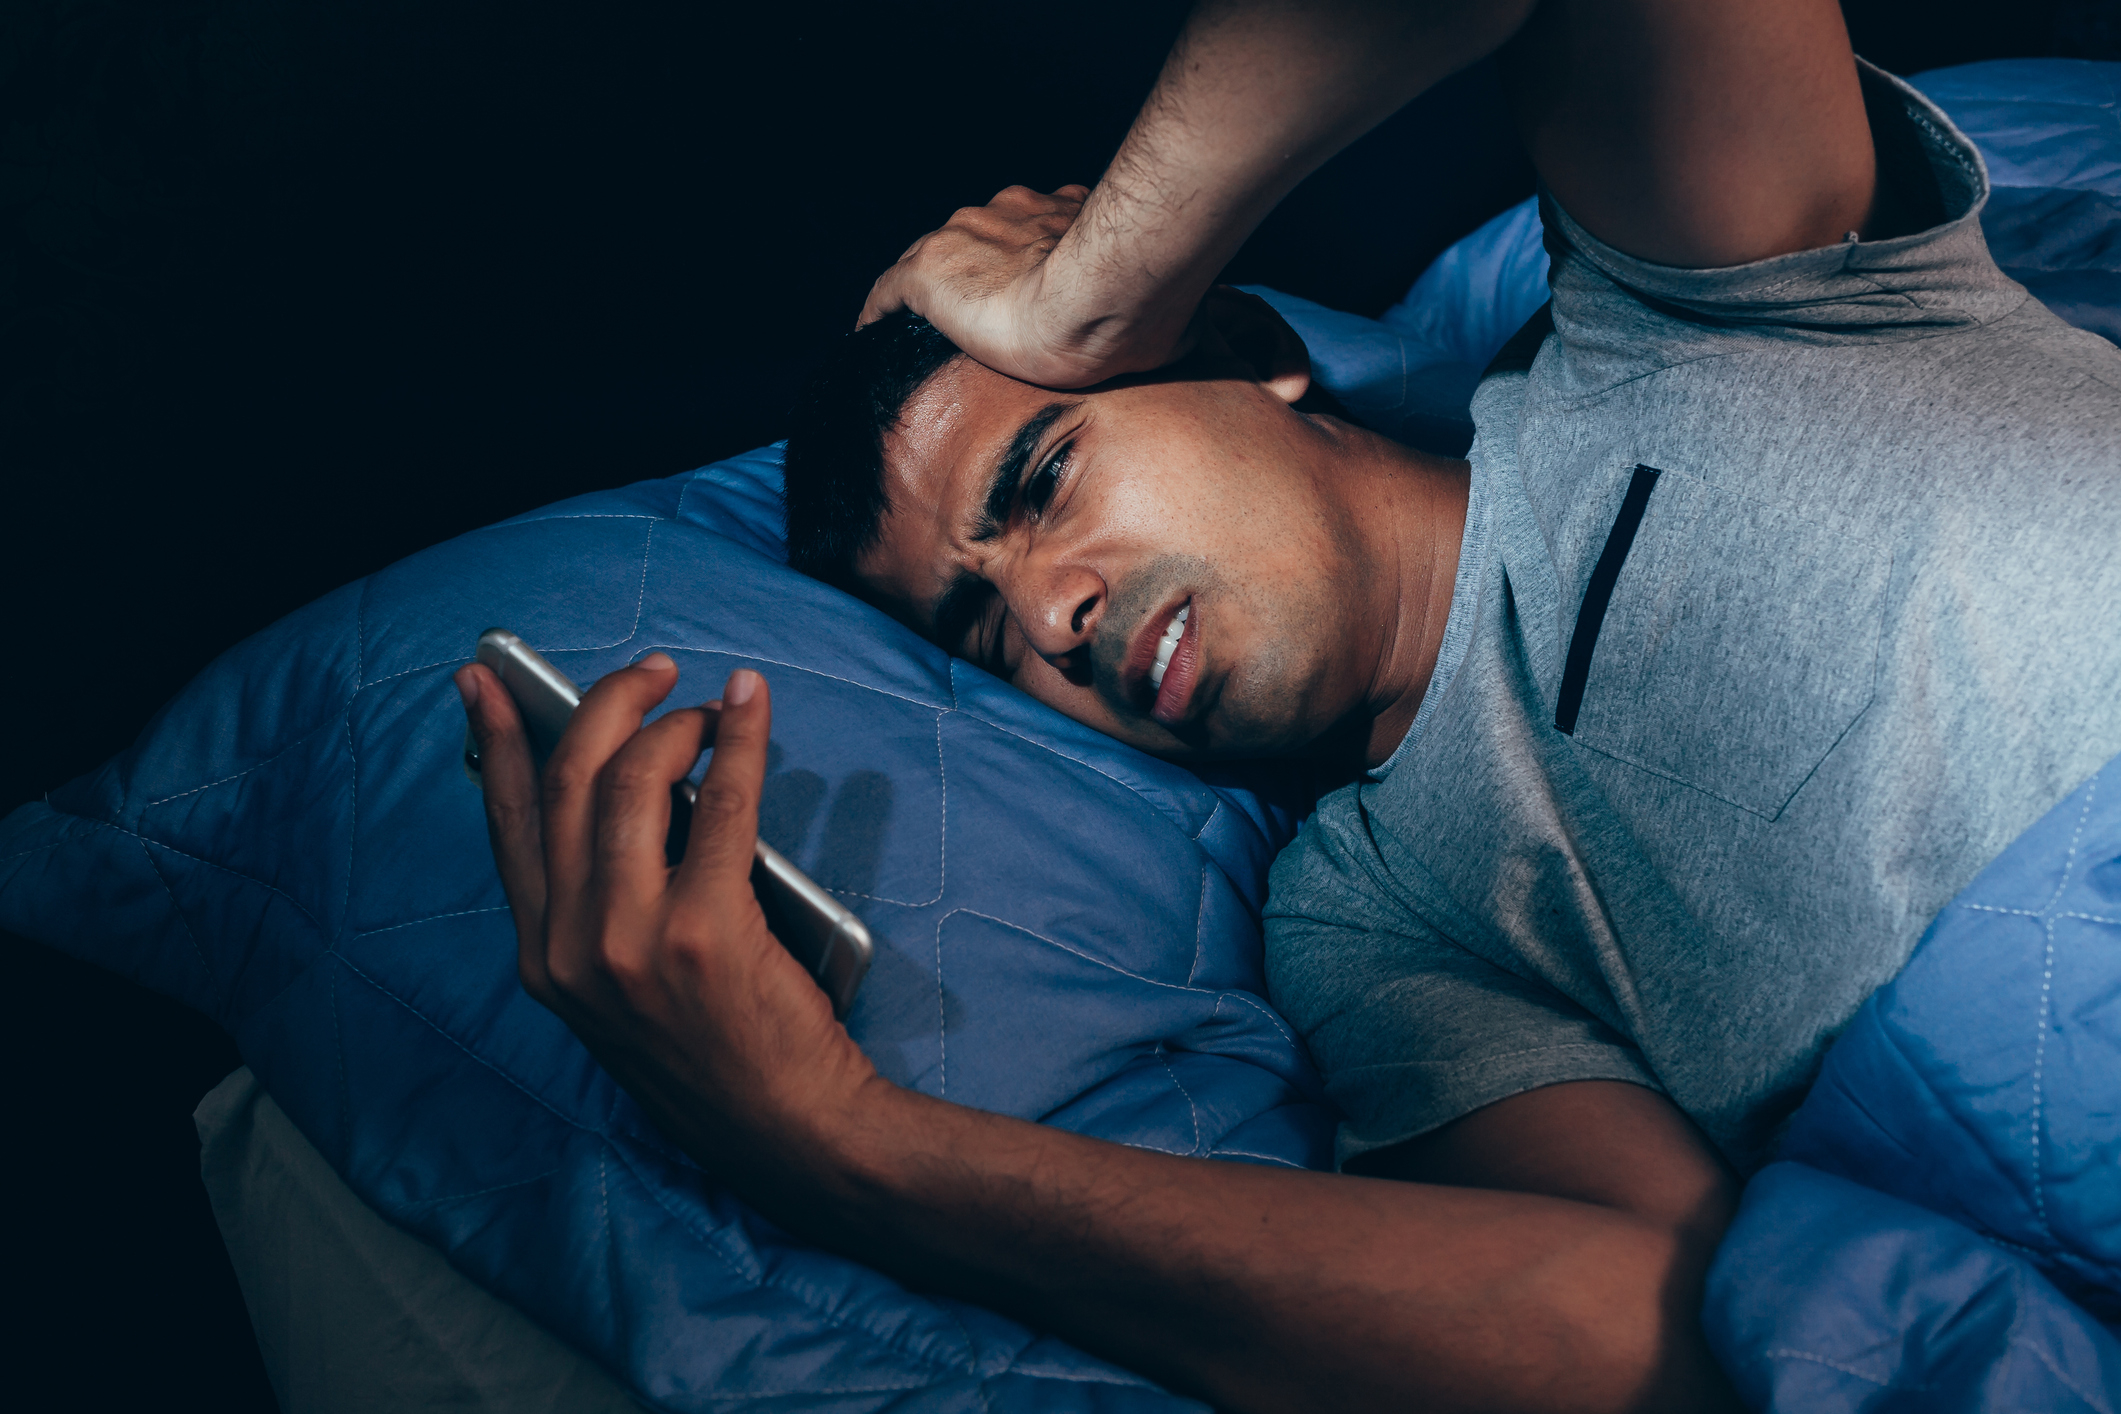 Man lying in bed holding a phone with a concerned expression